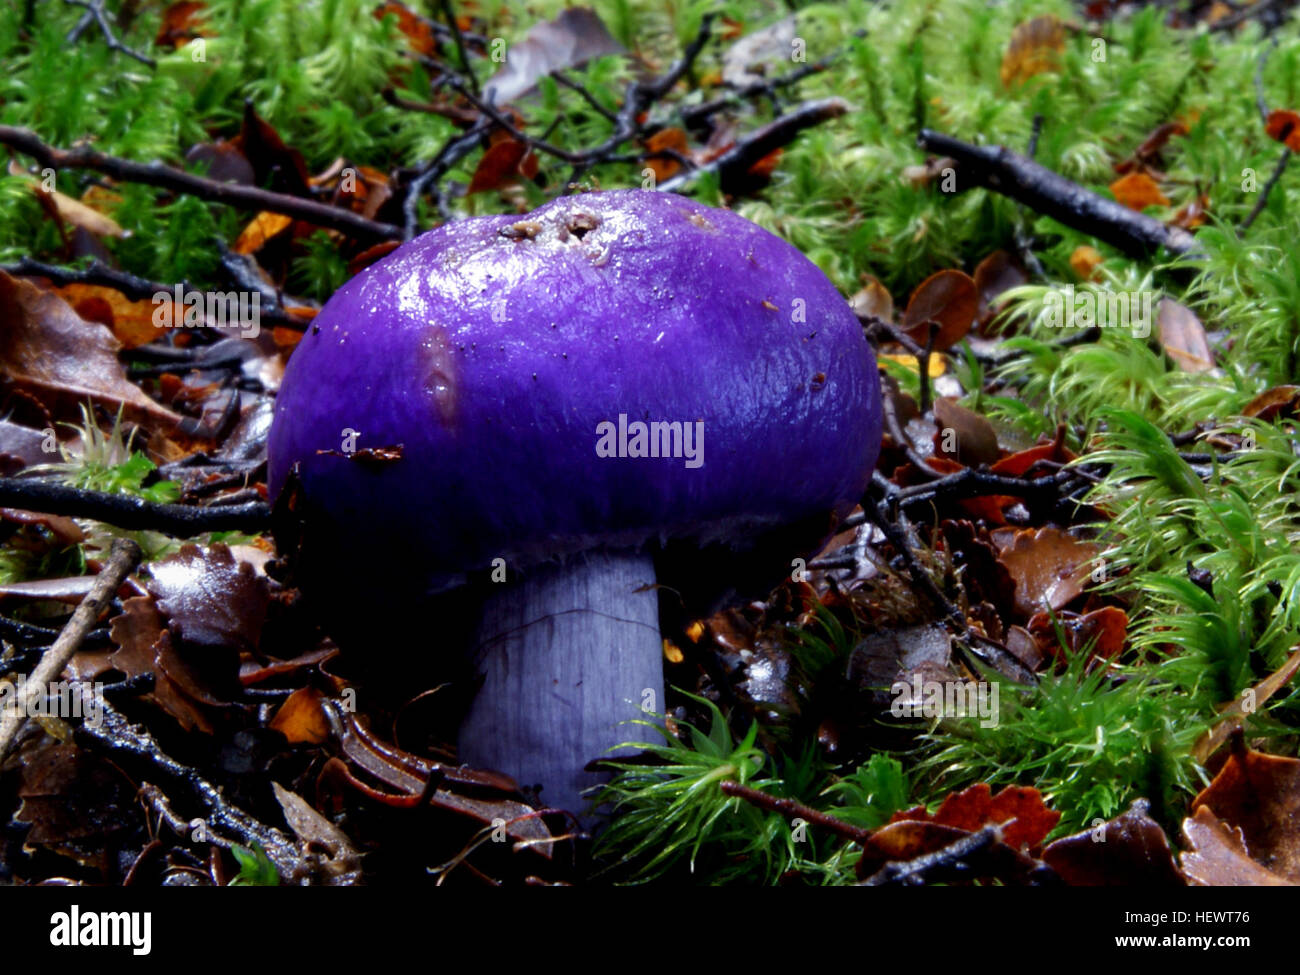 The violet pouch fungus (Thaxterogaster porphyreum) is a truffle-like fungus found in the leaf litter of beech forests. Its spore-producing tissue is enclosed within its purple cap. Spores are released when the cap begins to disintegrate, or when insects and other small animals eat the tissue within the cap. Stock Photo